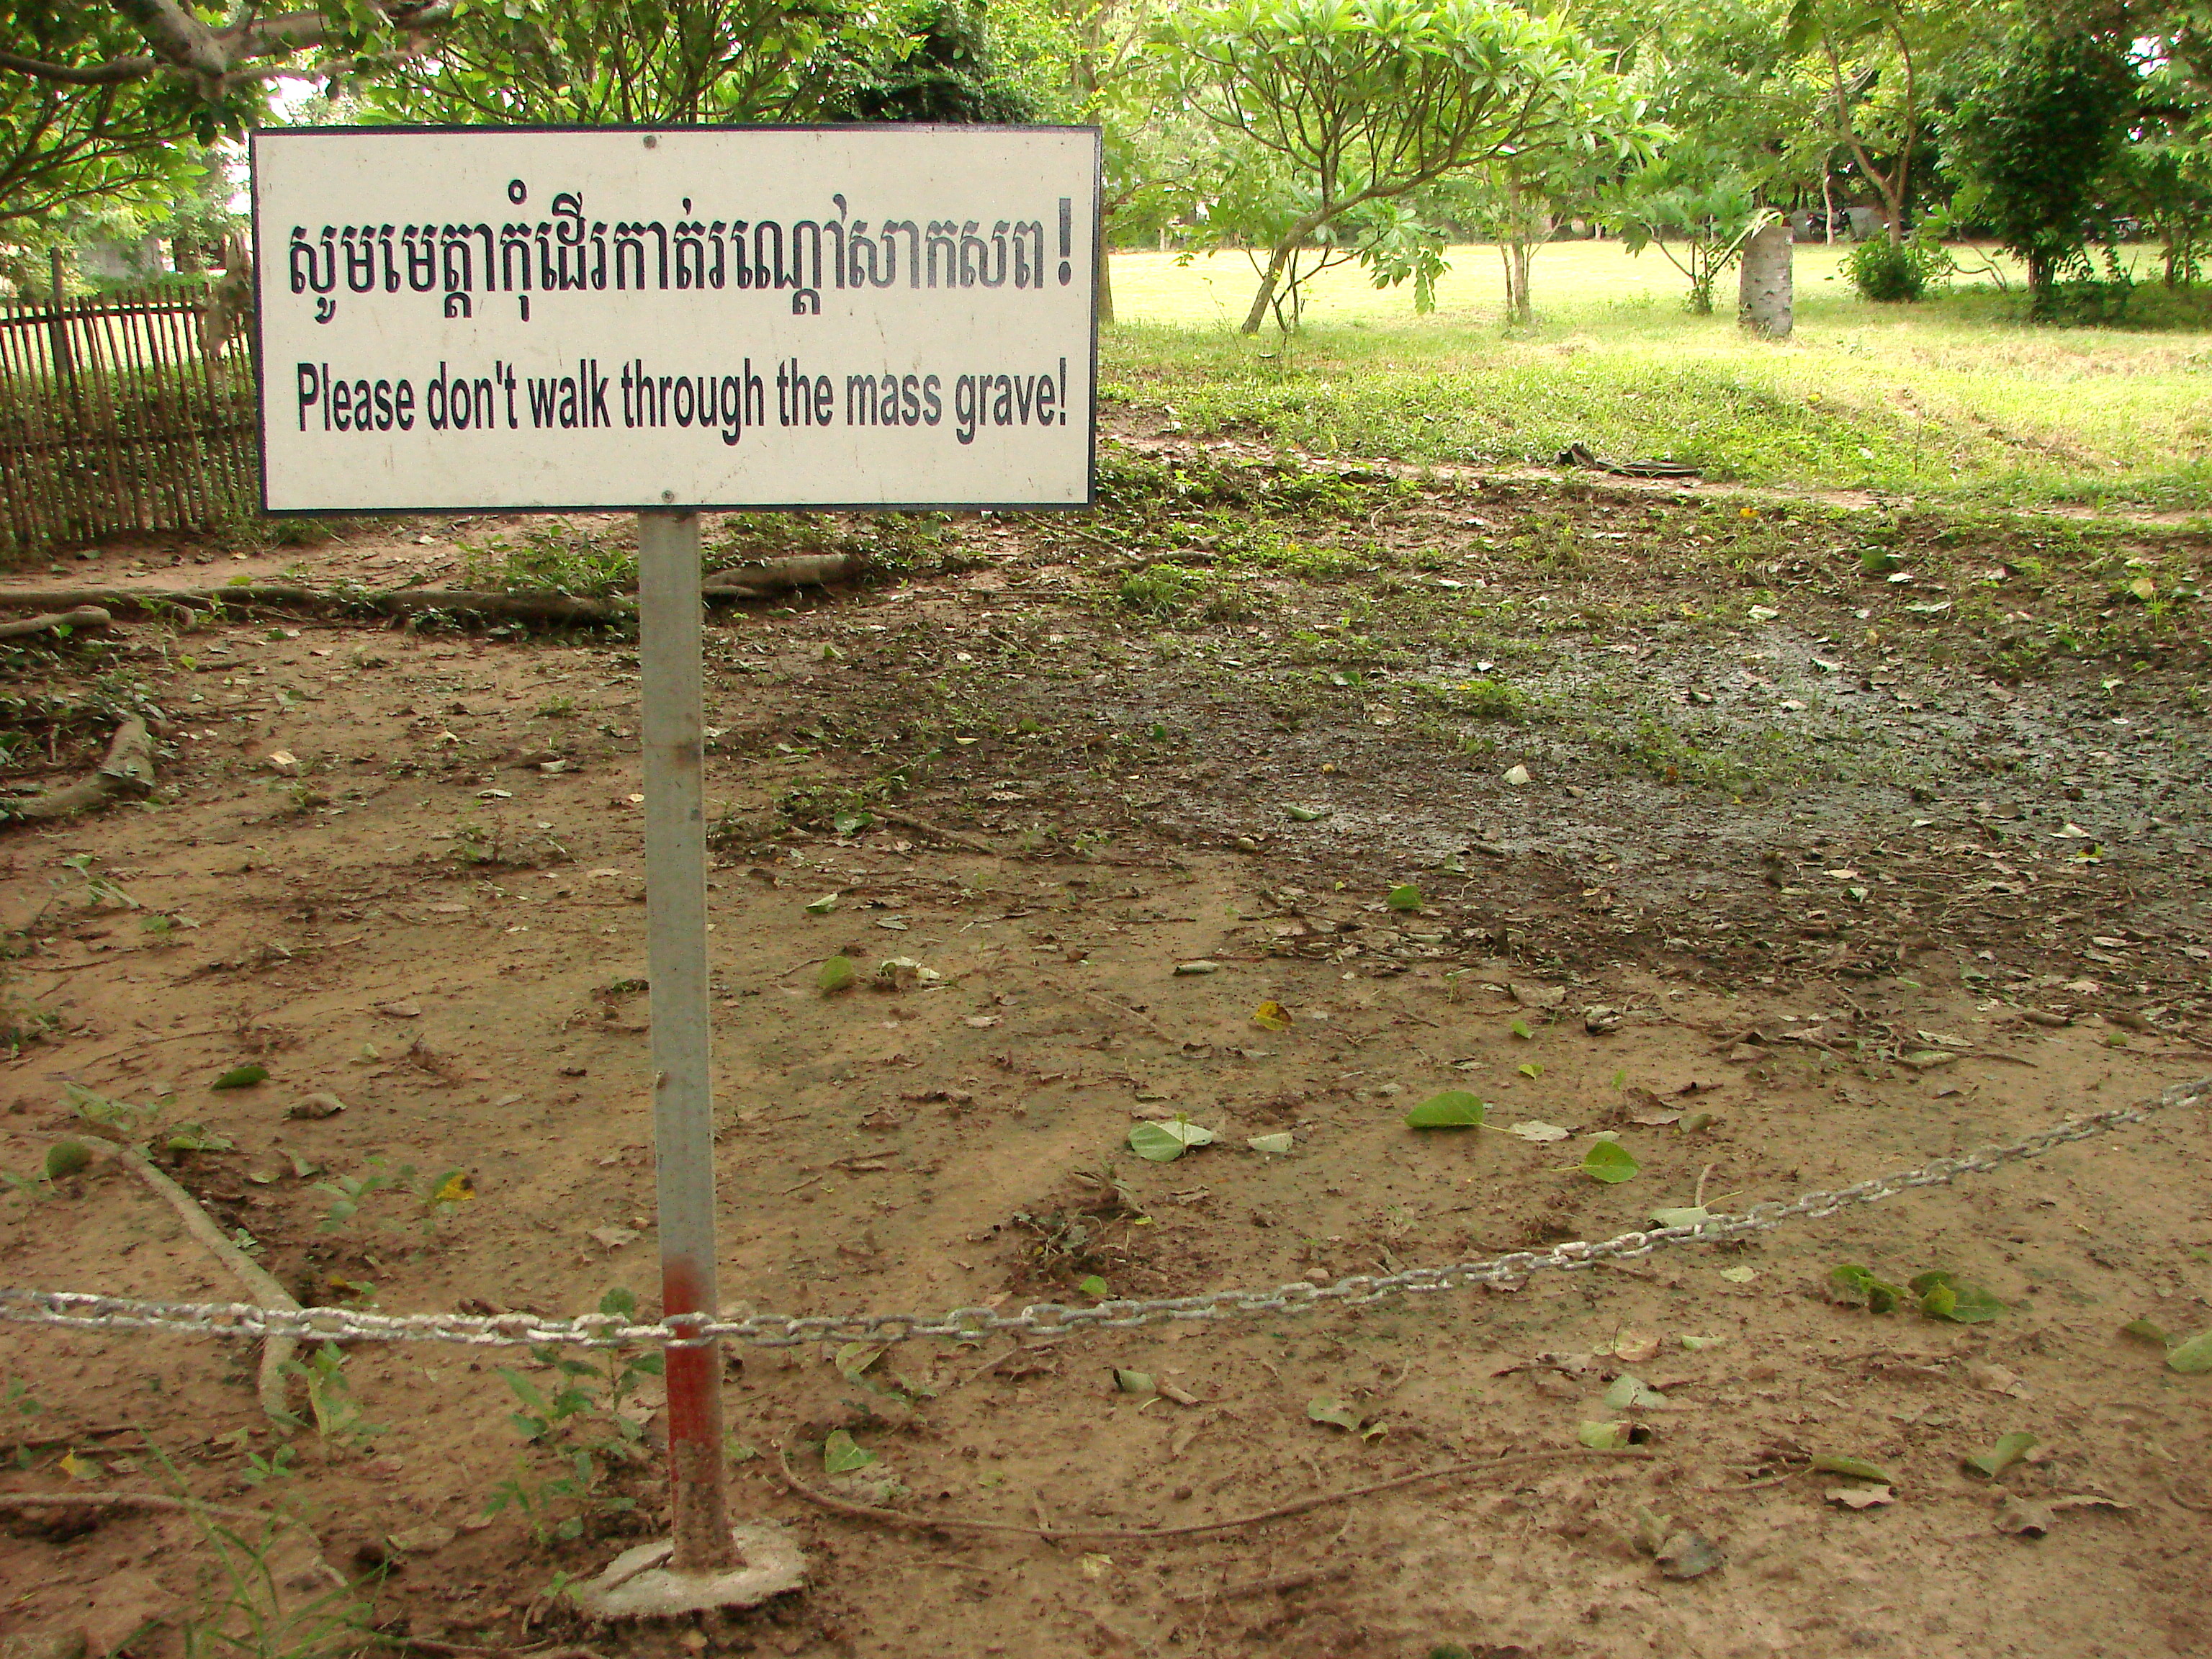 A chained off area with a sign reading Please don't walk through the mass grave!